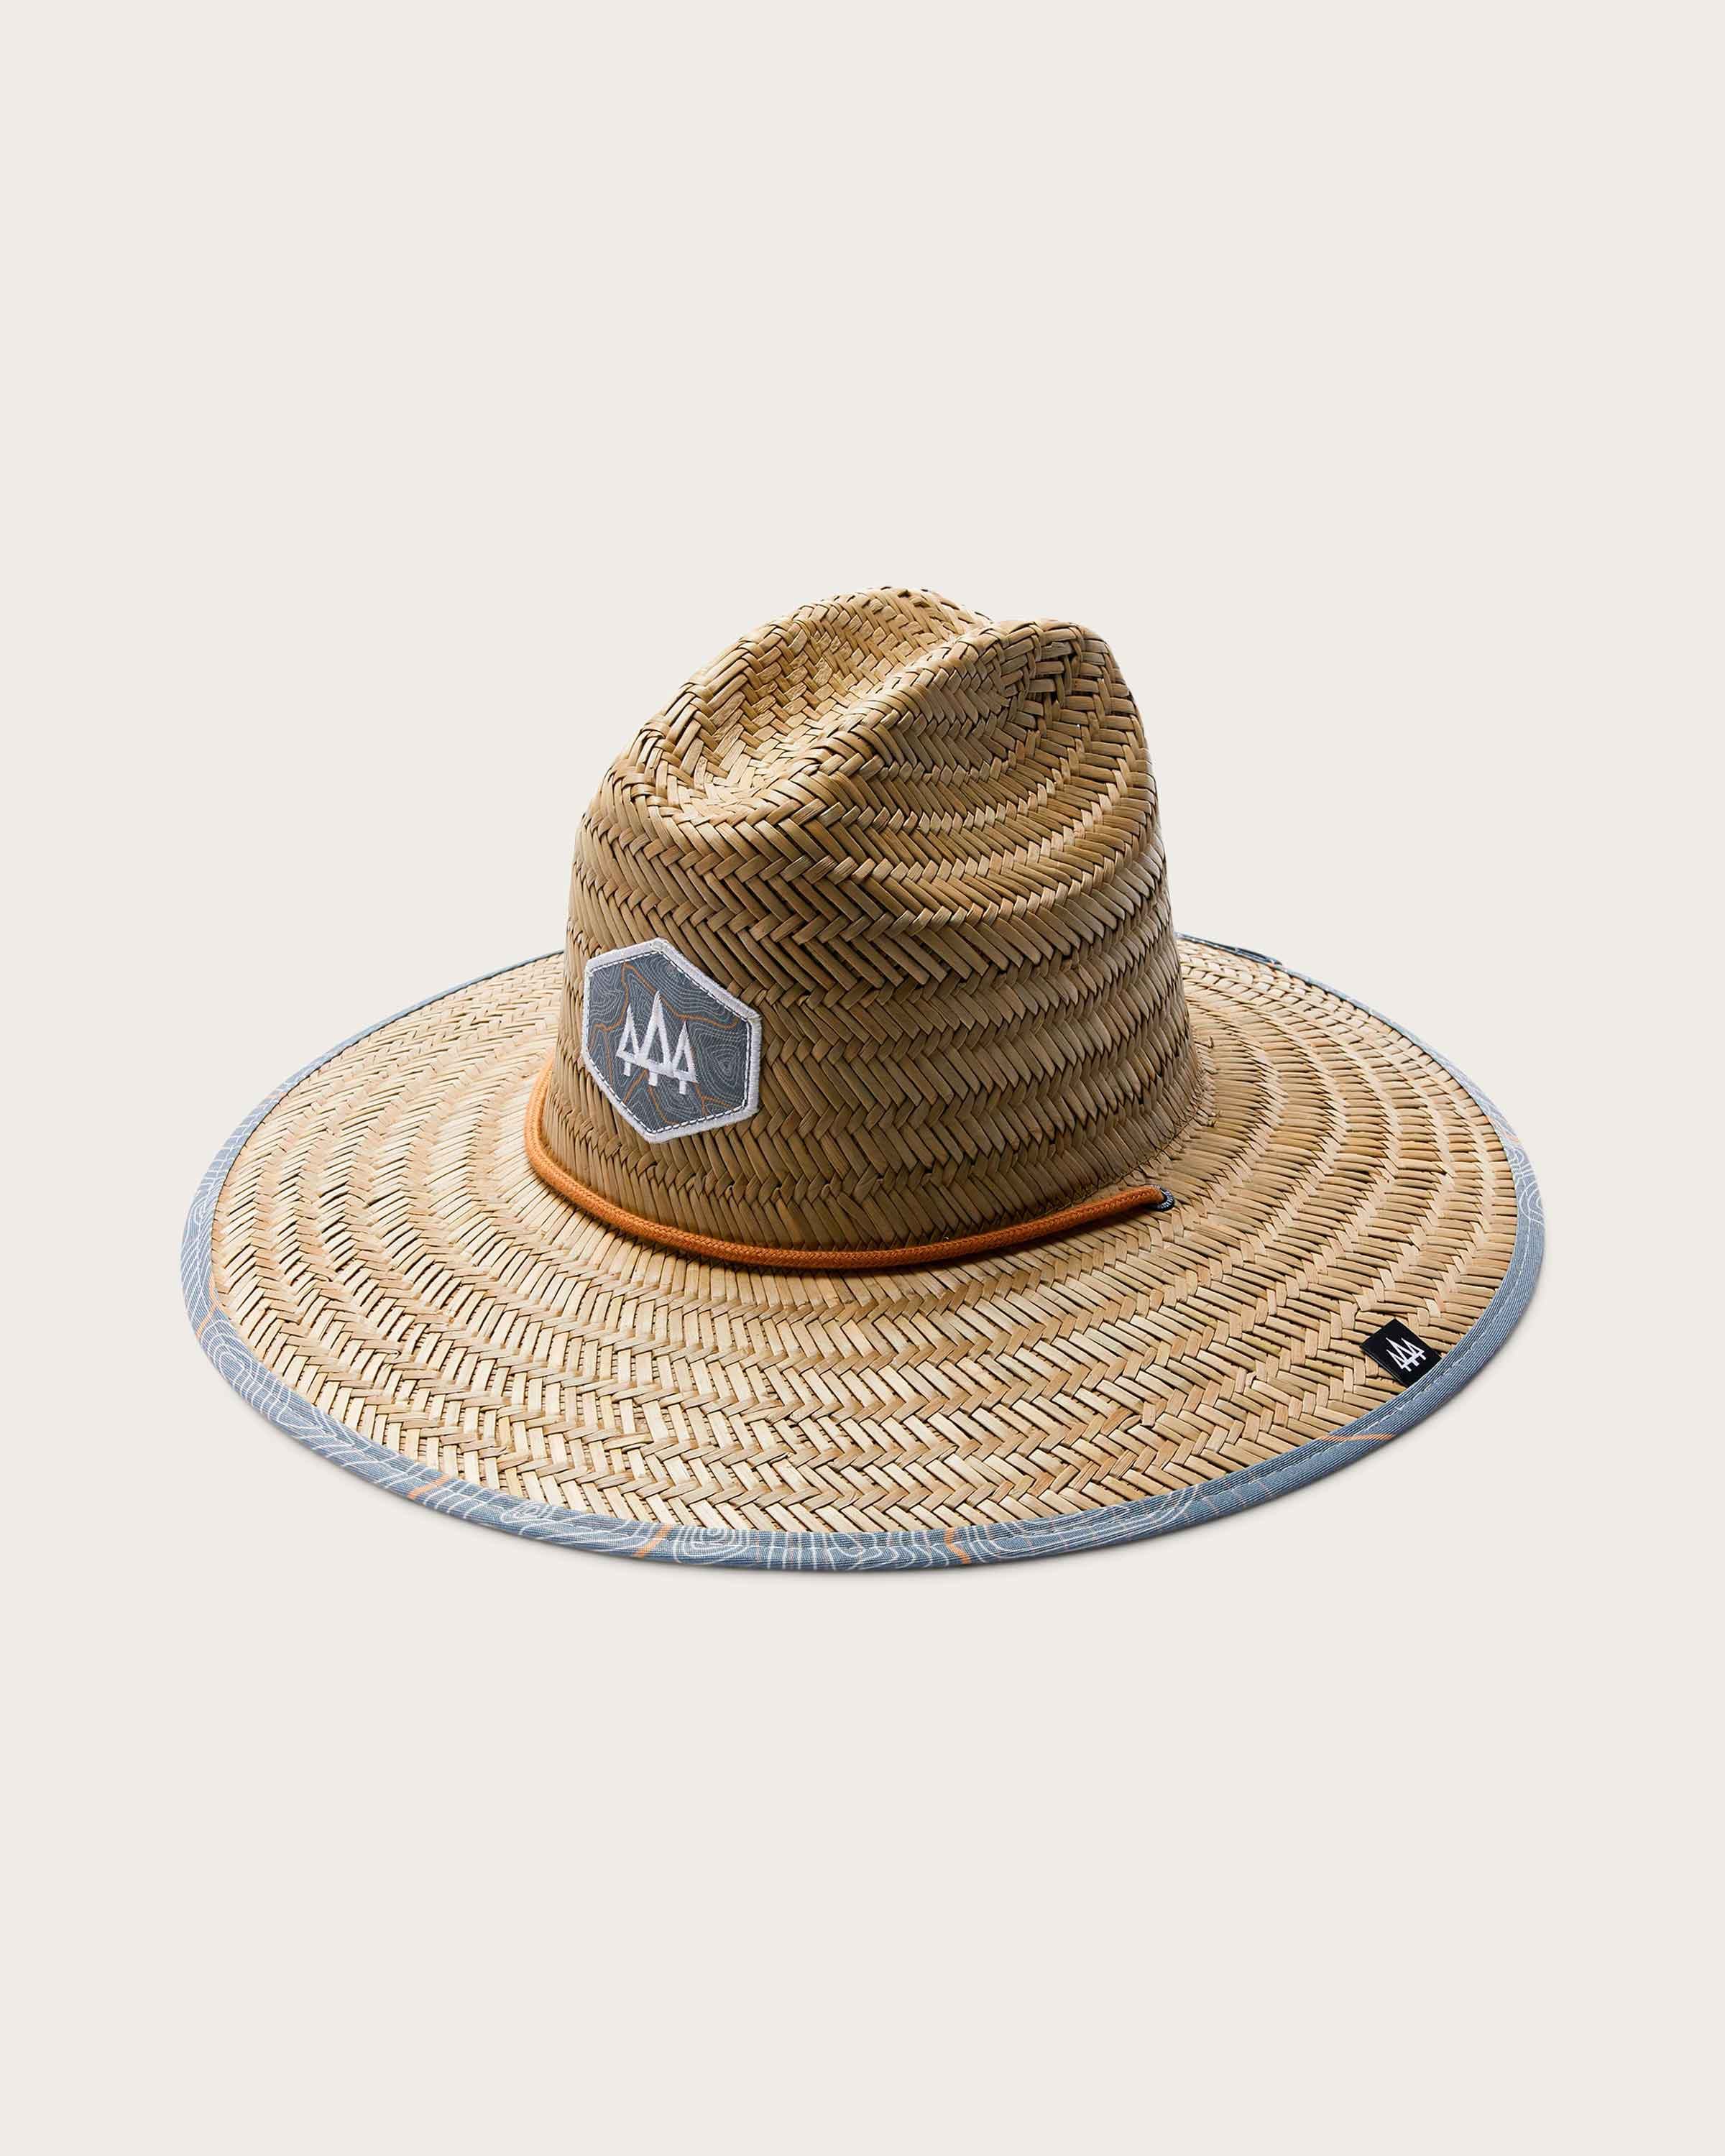 Nomad - undefined - Hemlock Hat Co. Lifeguards - Adults